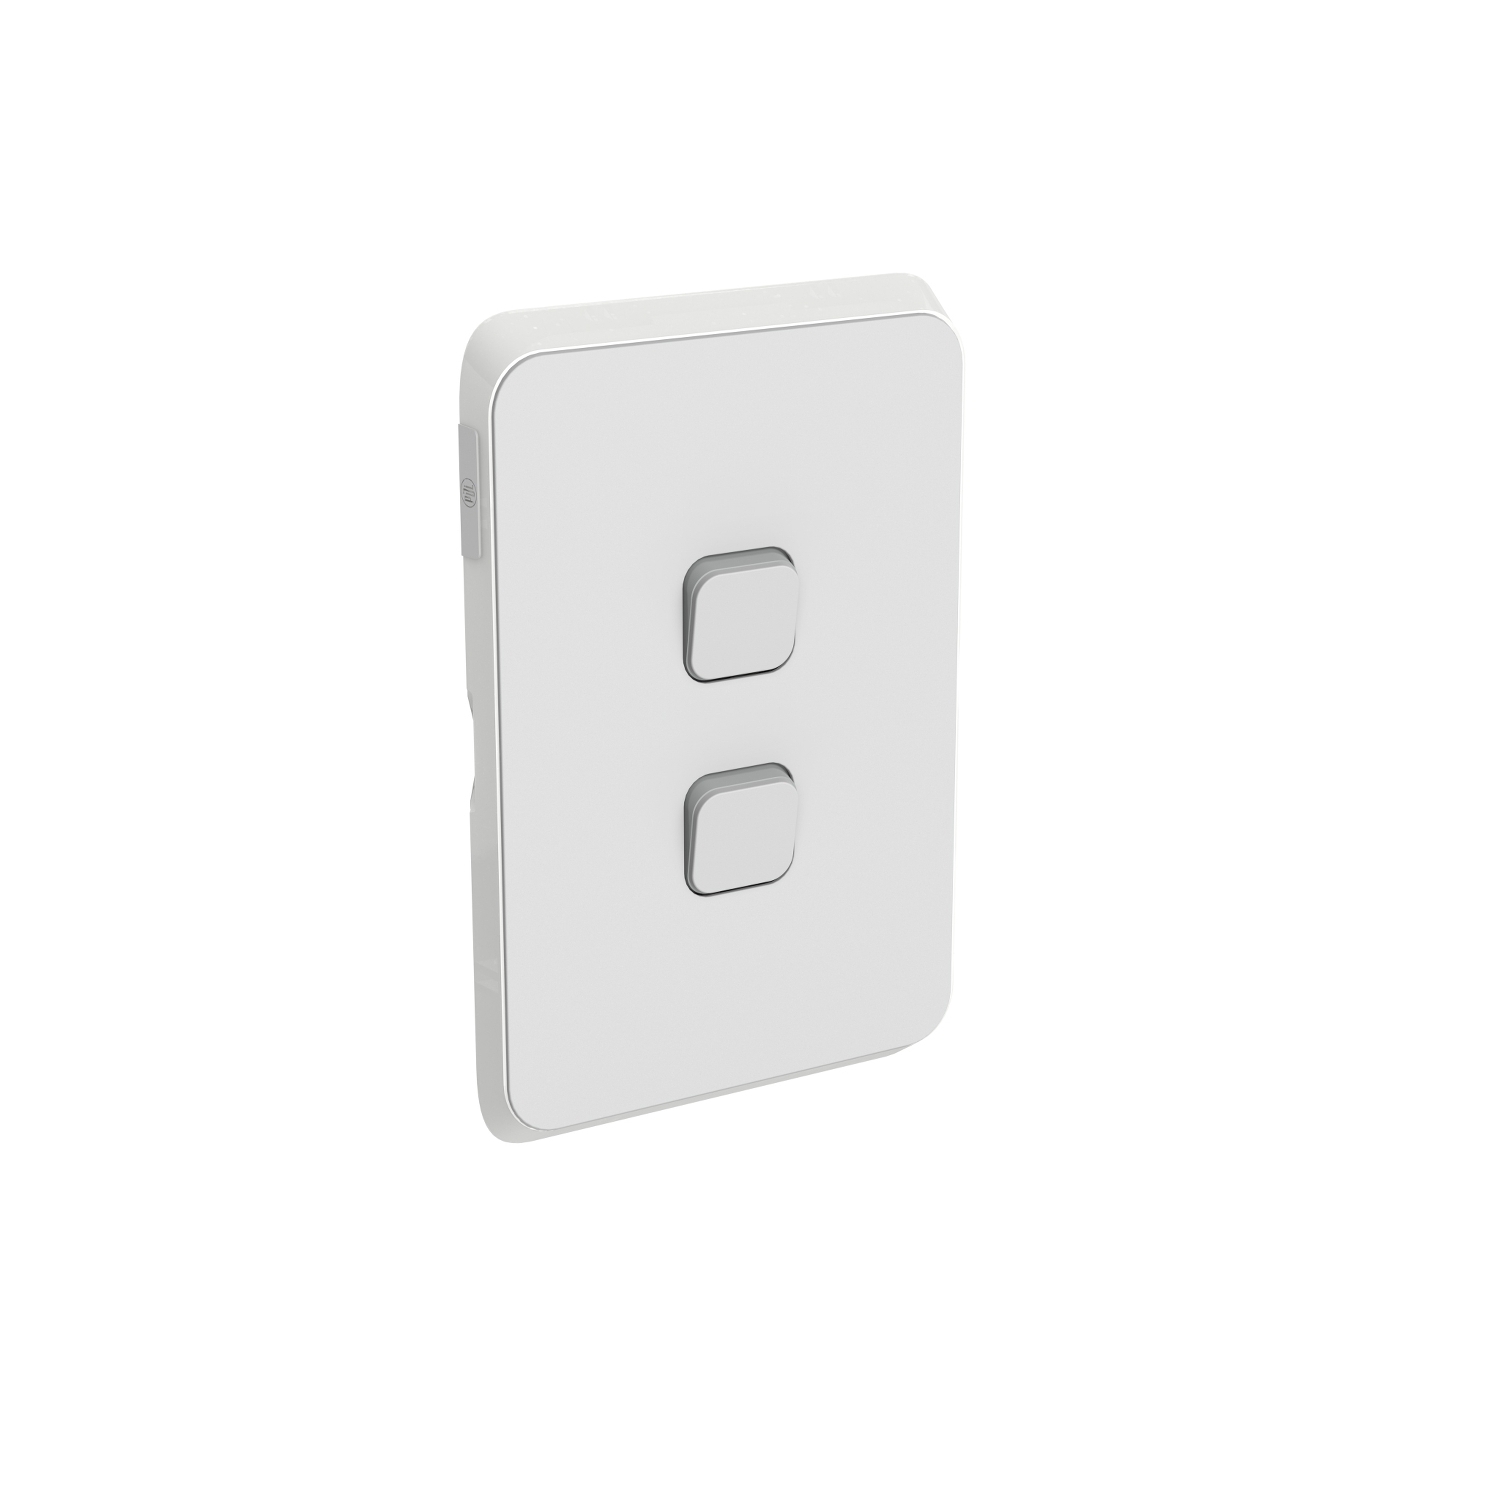 PDL382C-CY - PDL Iconic Cover Plate Switch 2Gang - Cool Grey